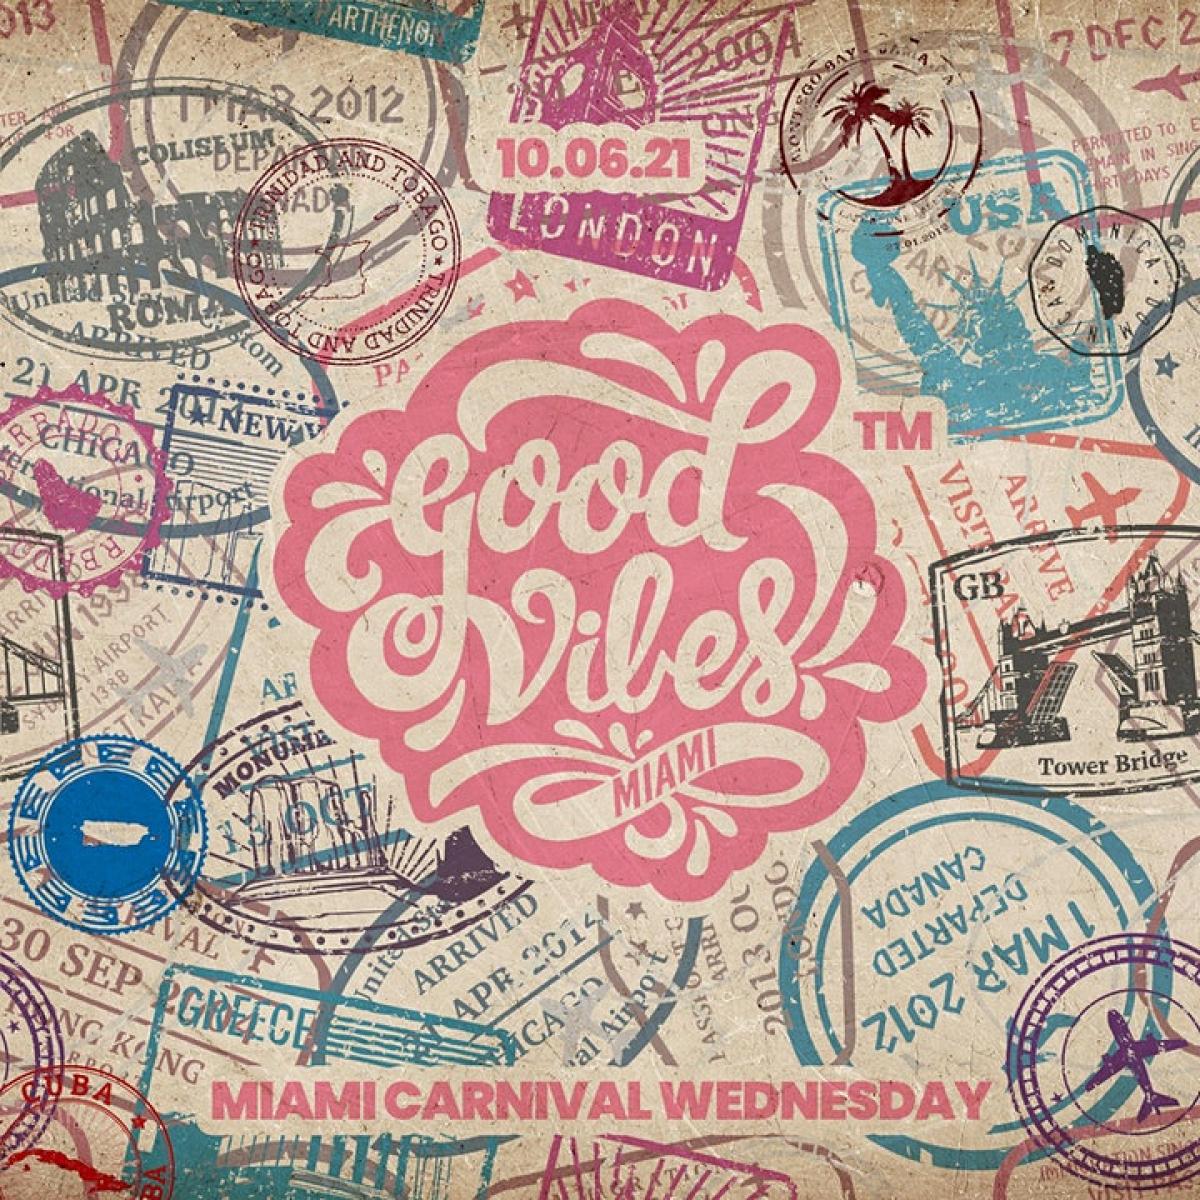 Good Vibes Only Carnival Kick-off flyer or graphic.